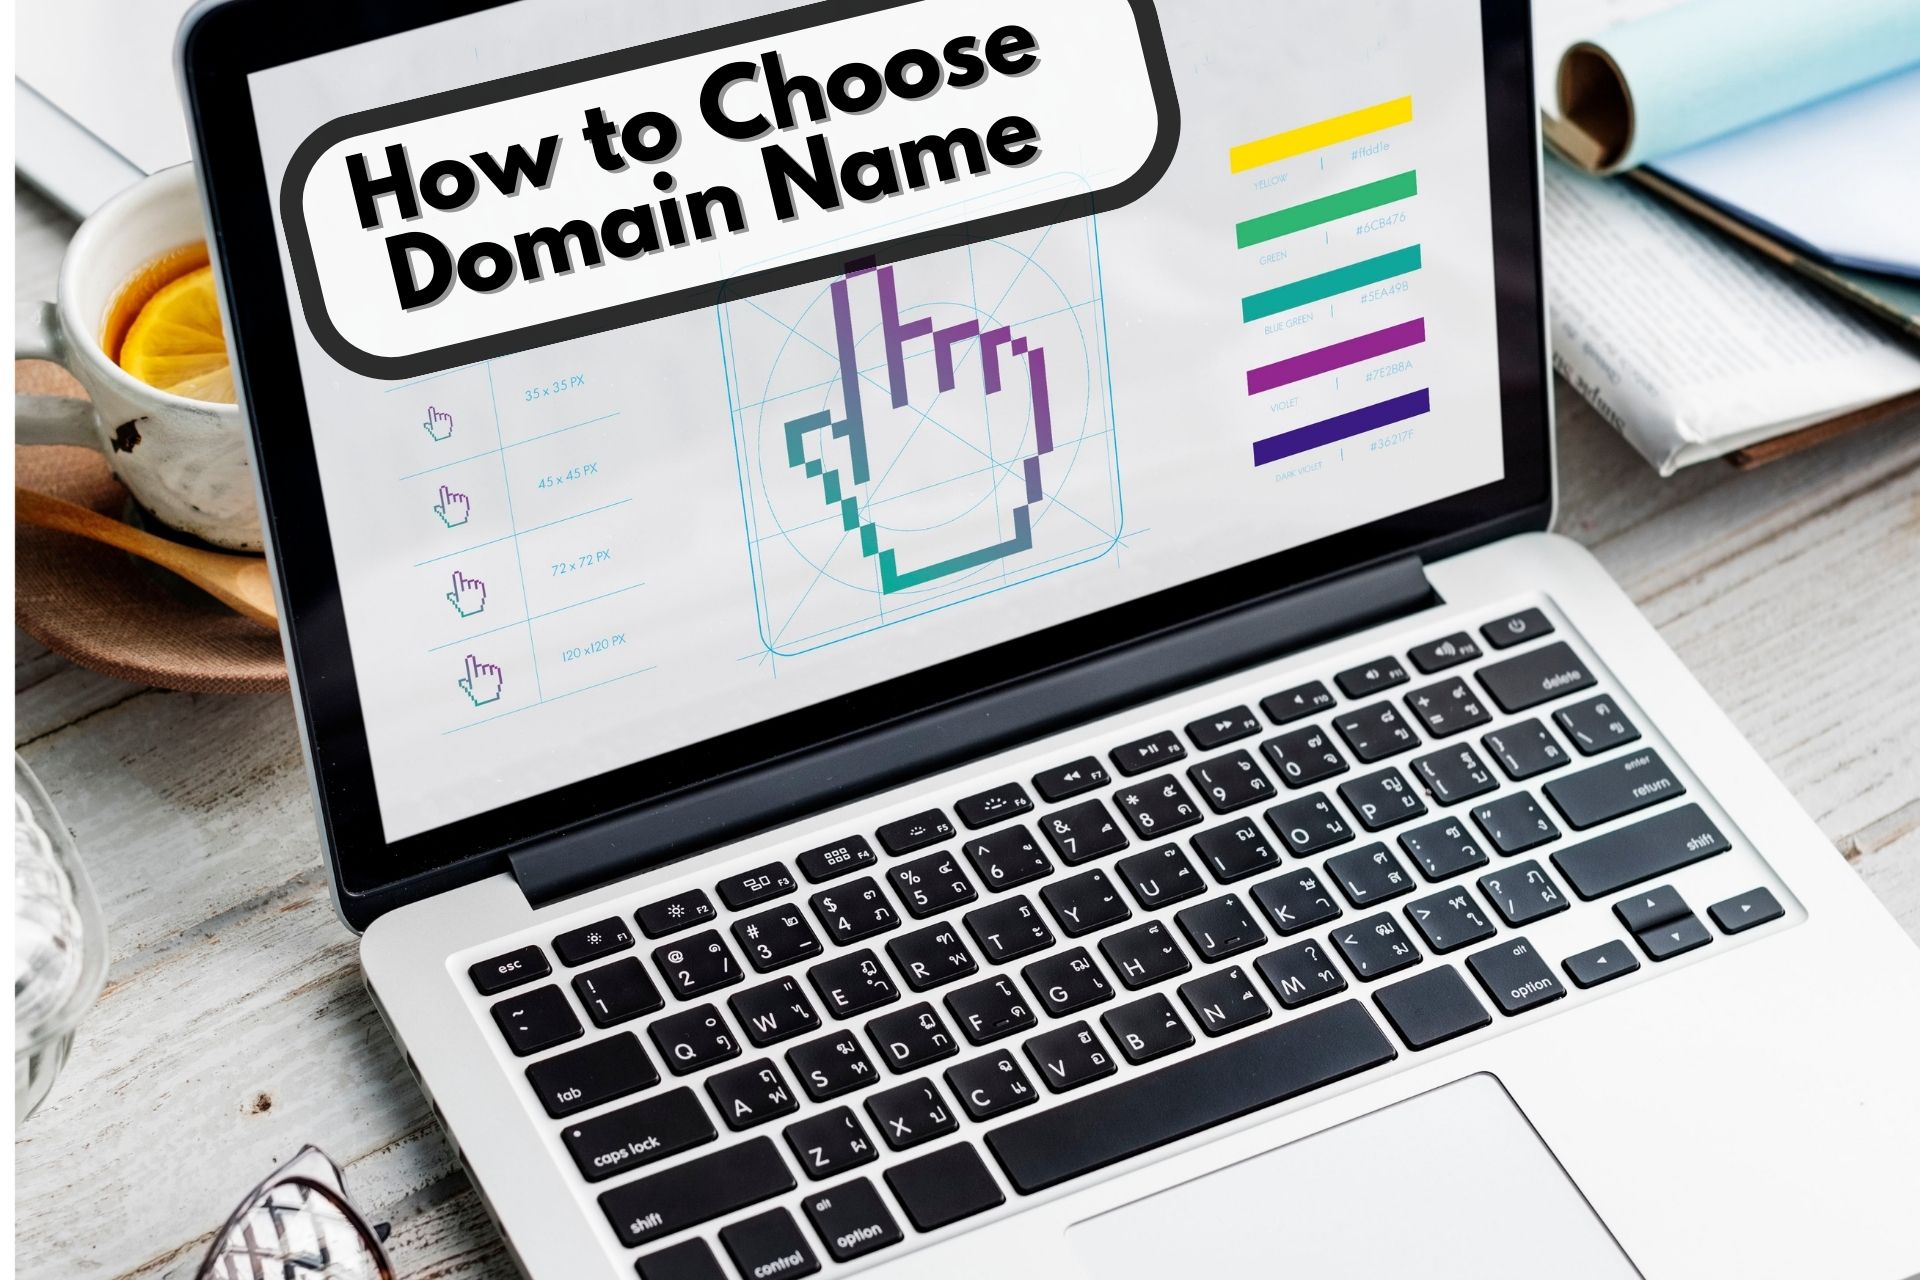 10 Tips on How to Choose a Domain Name That Ranks…